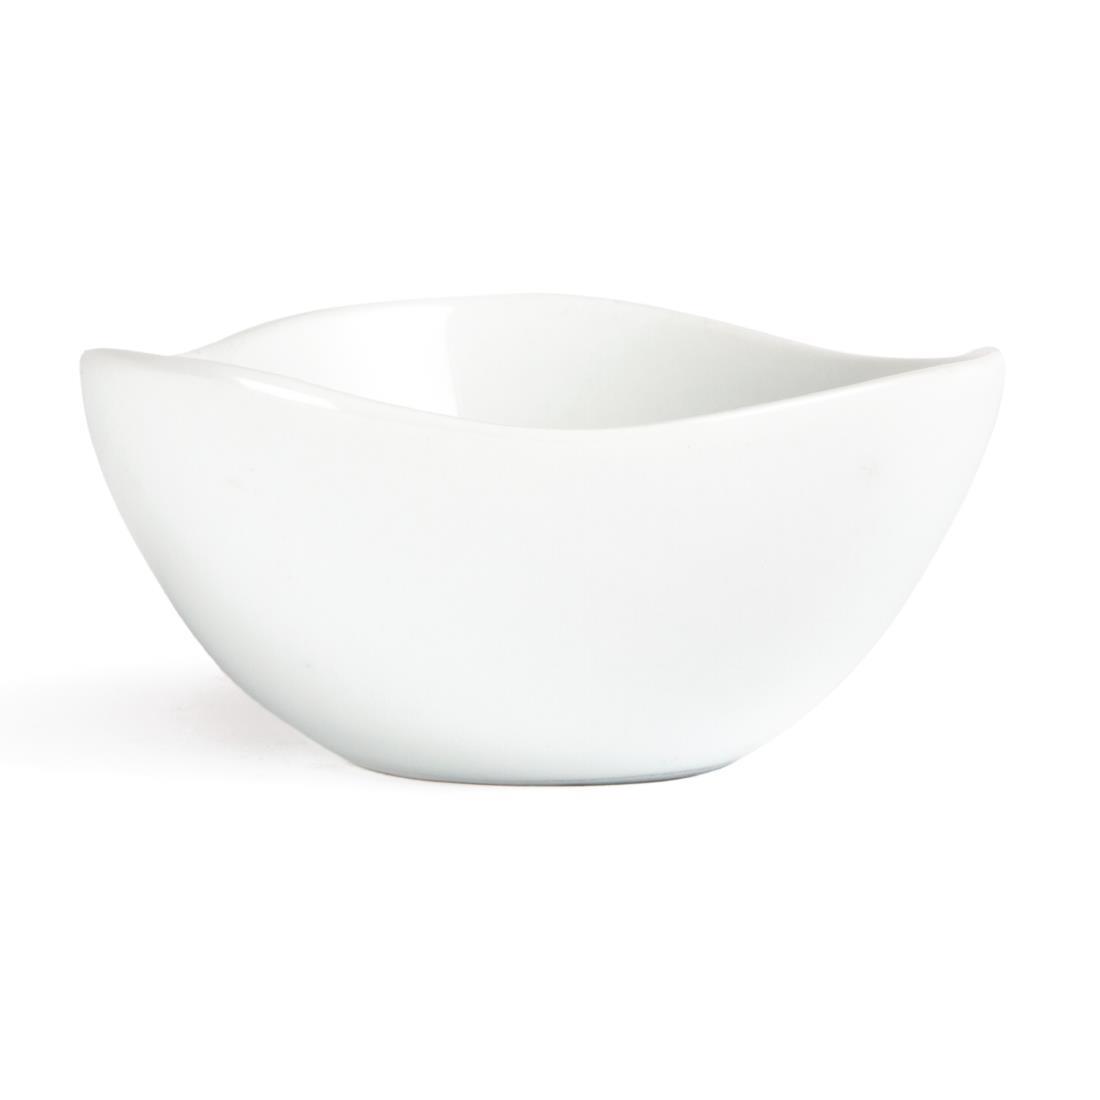 Olympia Whiteware Wavy Bowls 105mm (Pack of 12) - U185  - 2